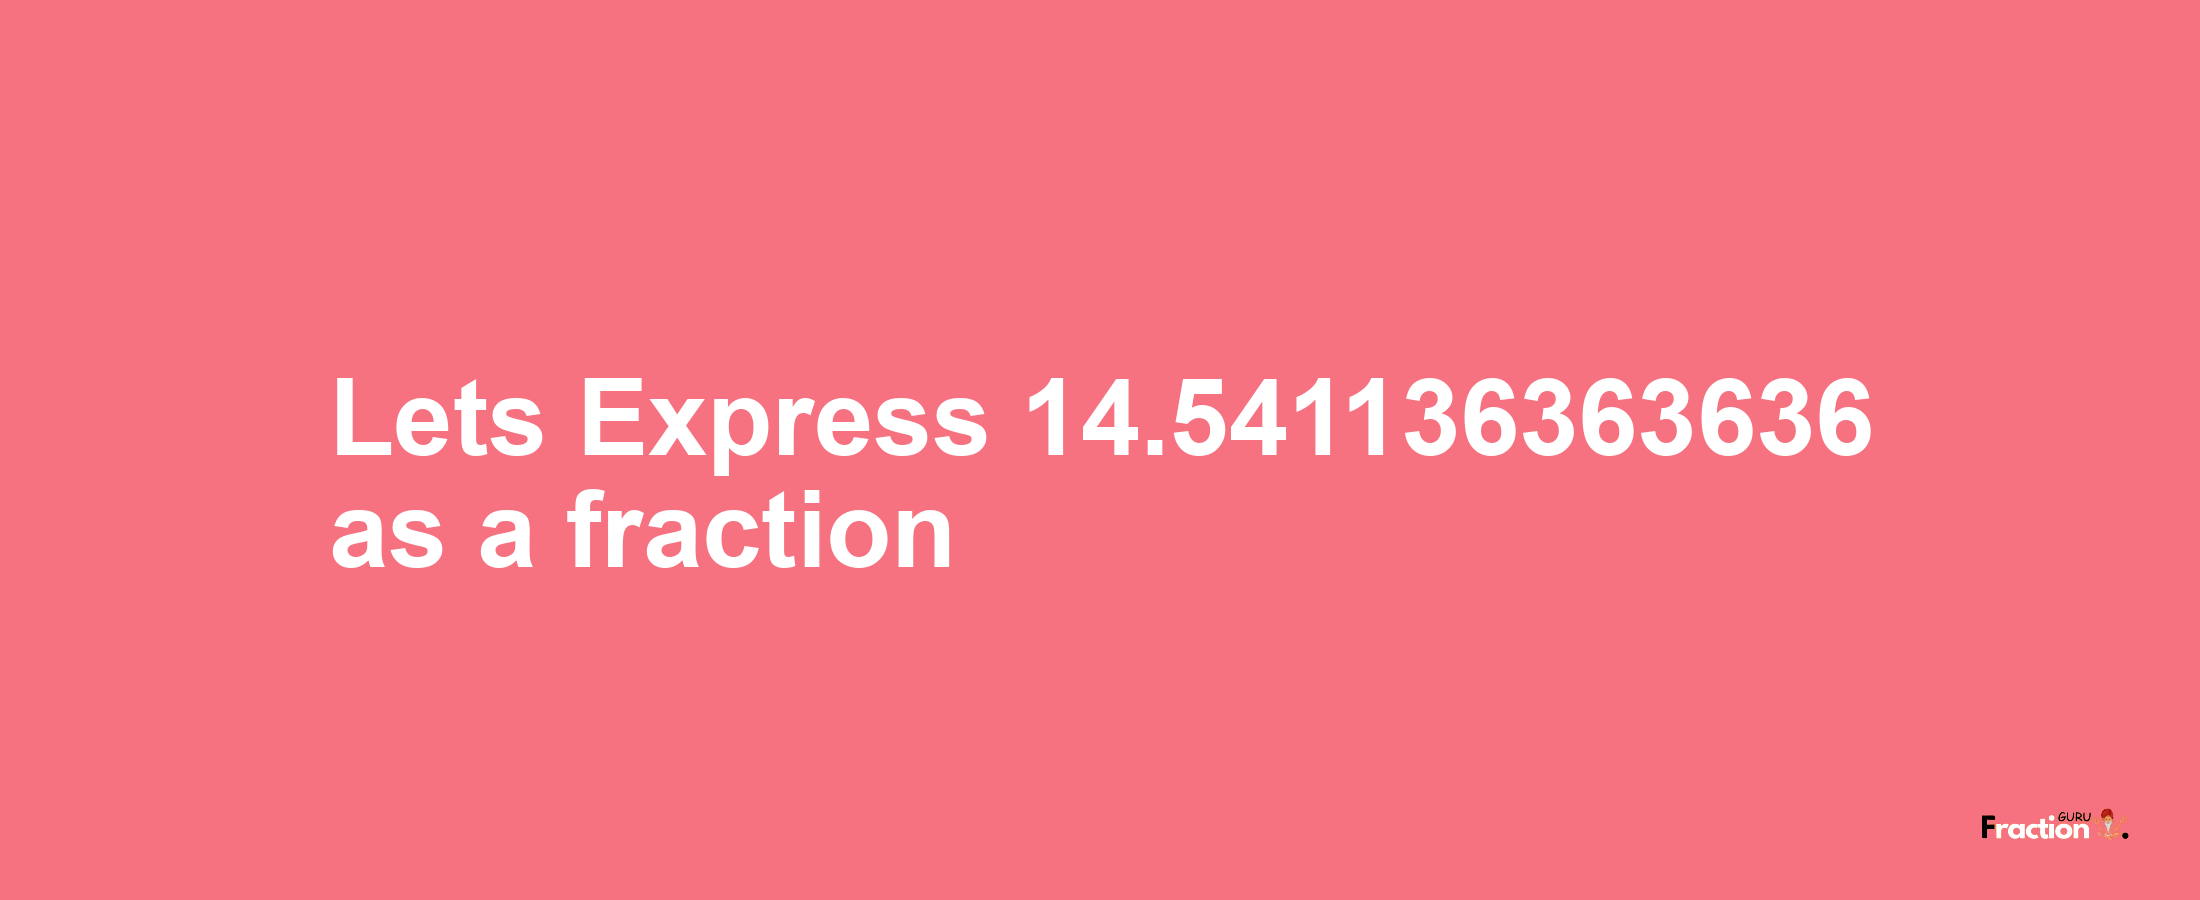 Lets Express 14.541136363636 as afraction